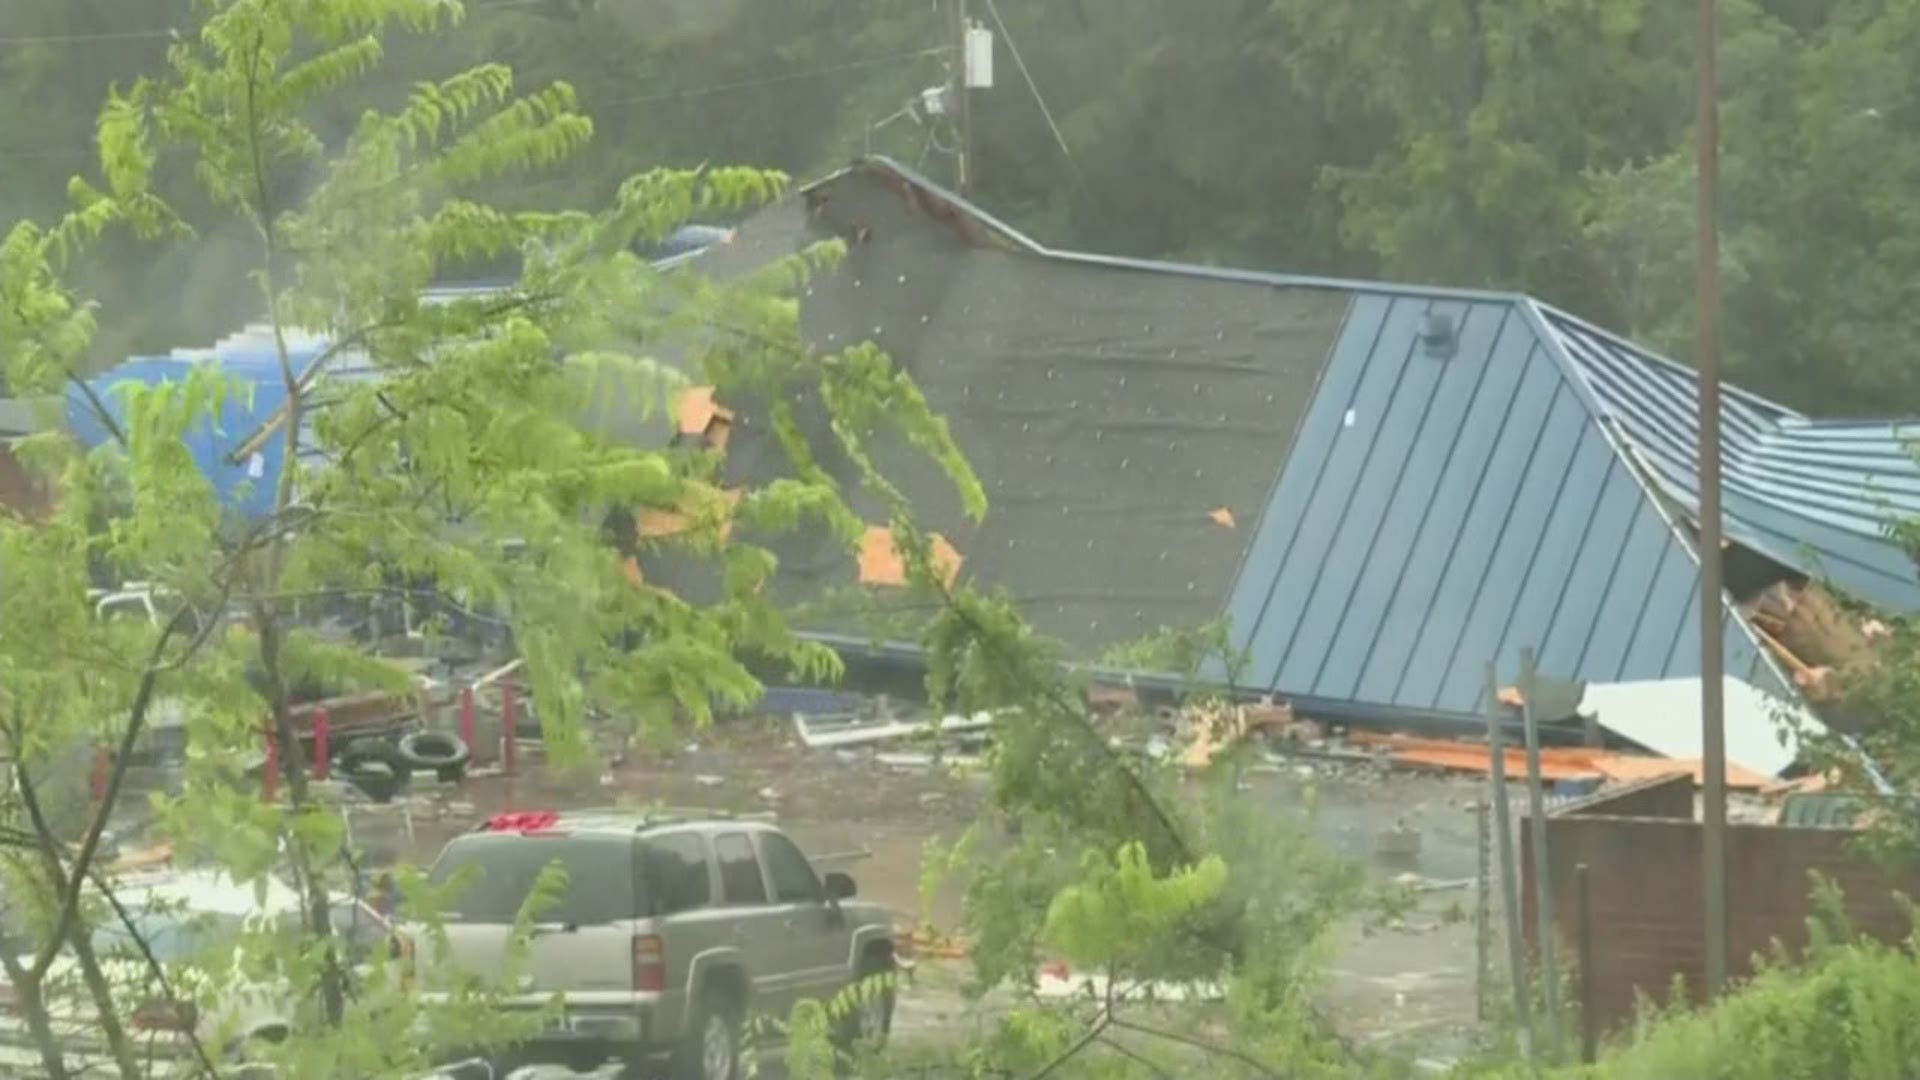 A tornado ripped through part of Fairfield, AL, injuring 4 people and destroying buildings.